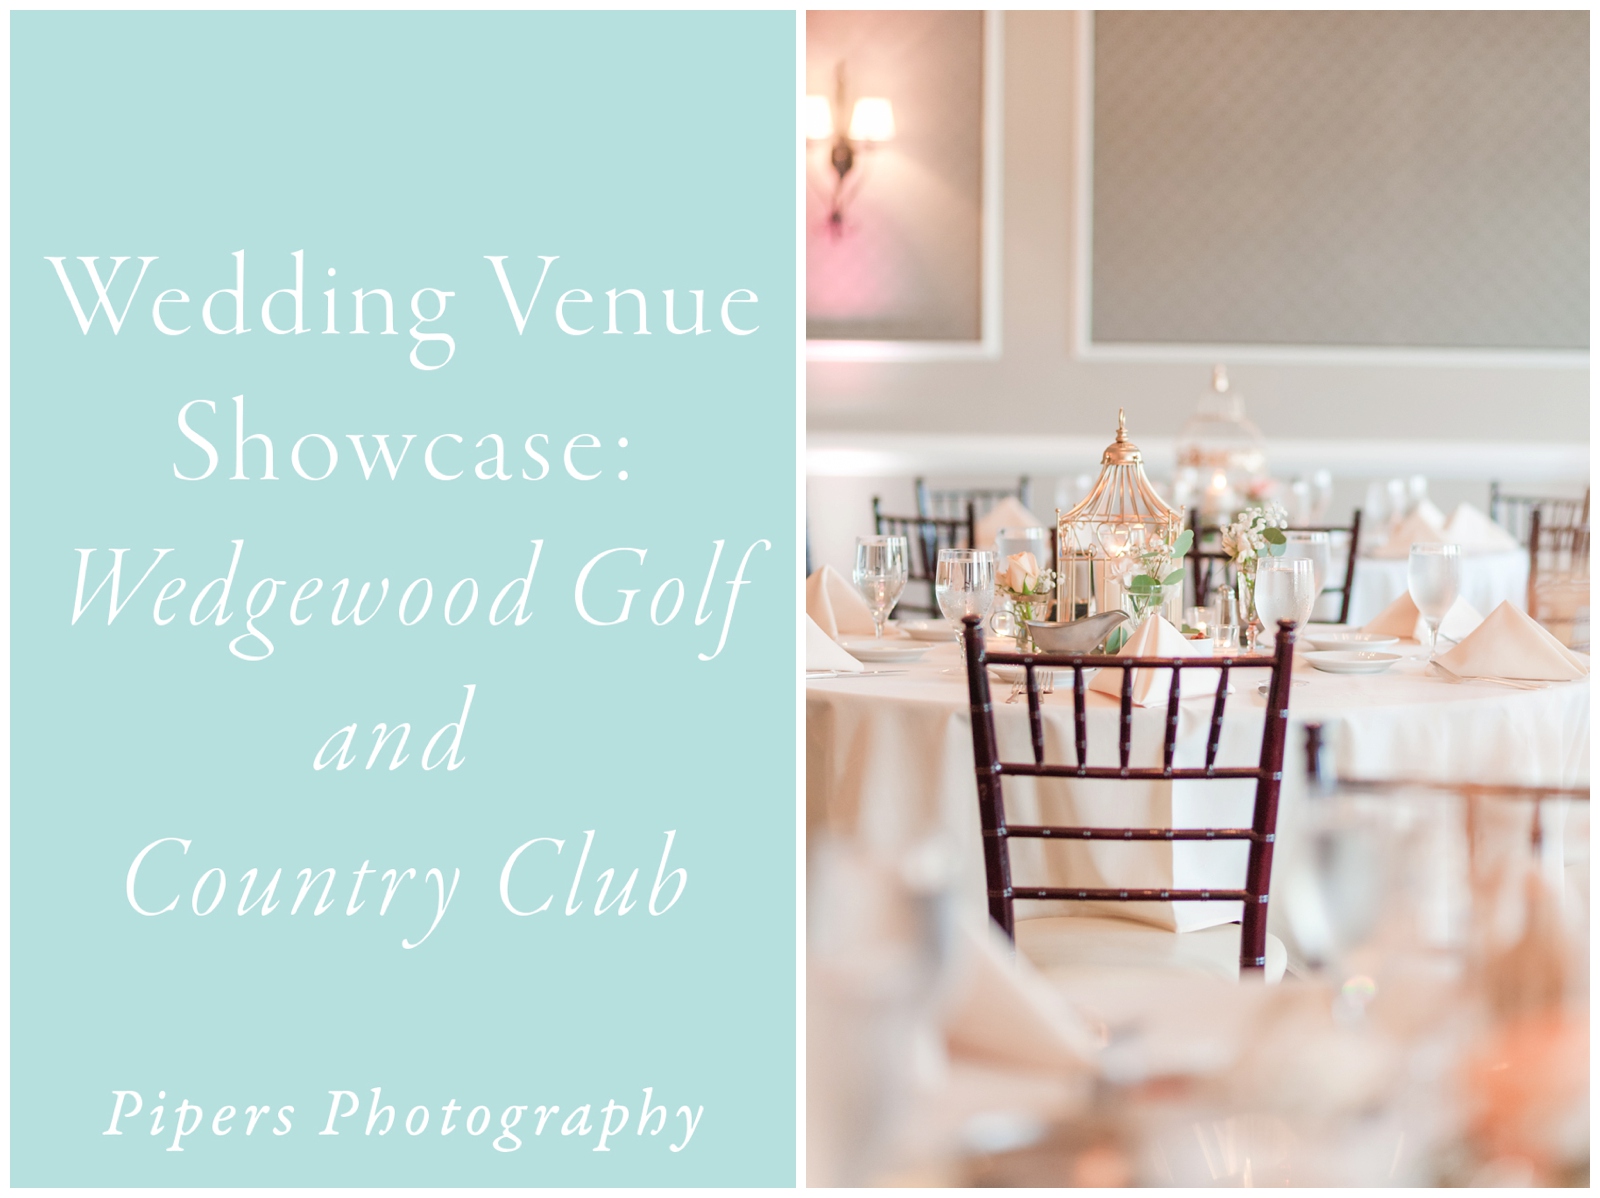 Wedding venue showcase on Wedgewood Golf and Country Club Powell, Ohio by Pipers Photography 